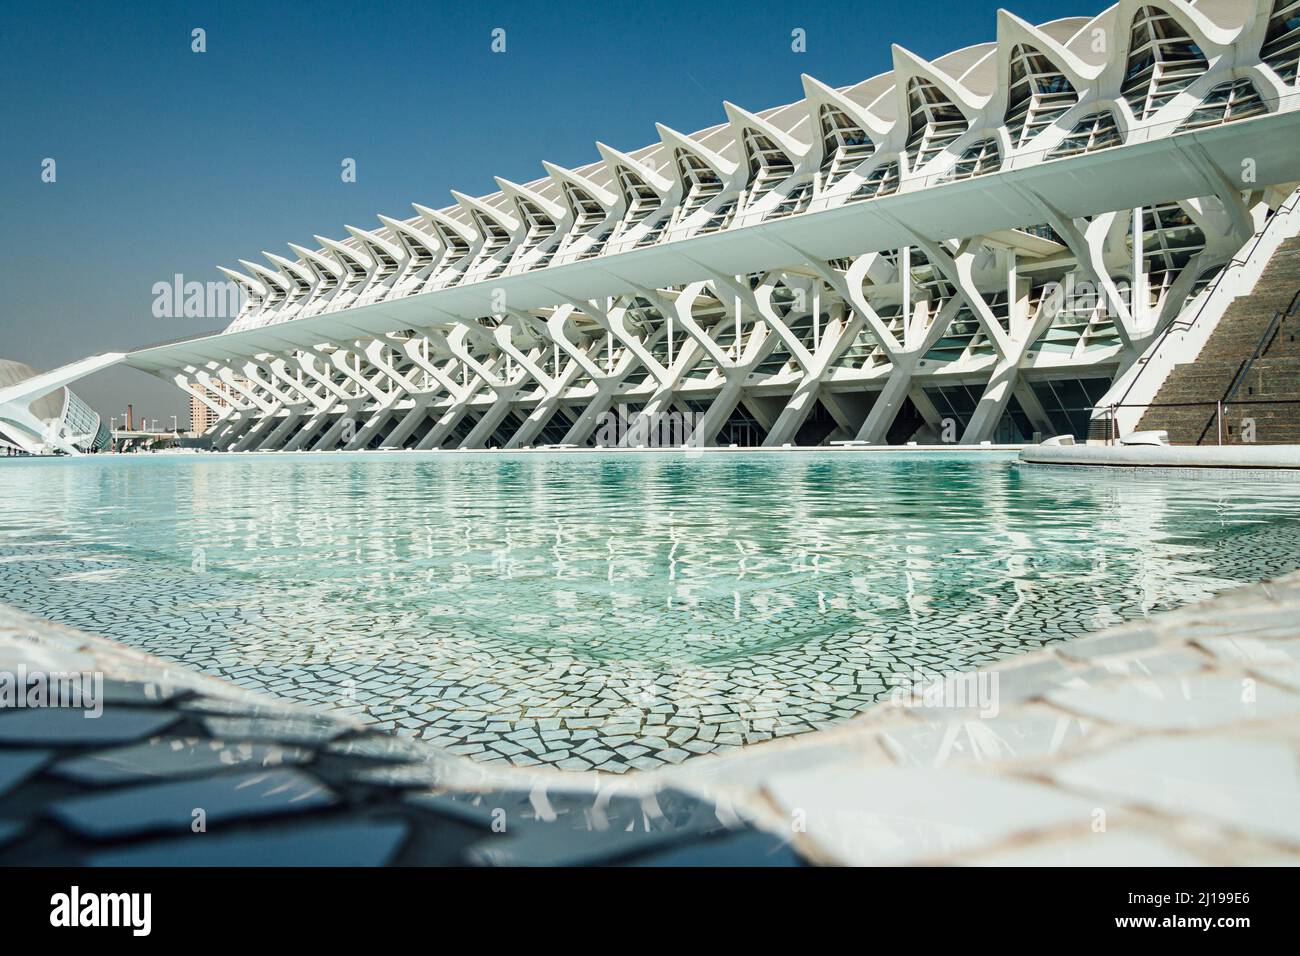 Modern architecture in the city of arts and sciences - Oceanografic Valencia Spain.  Stock Photo